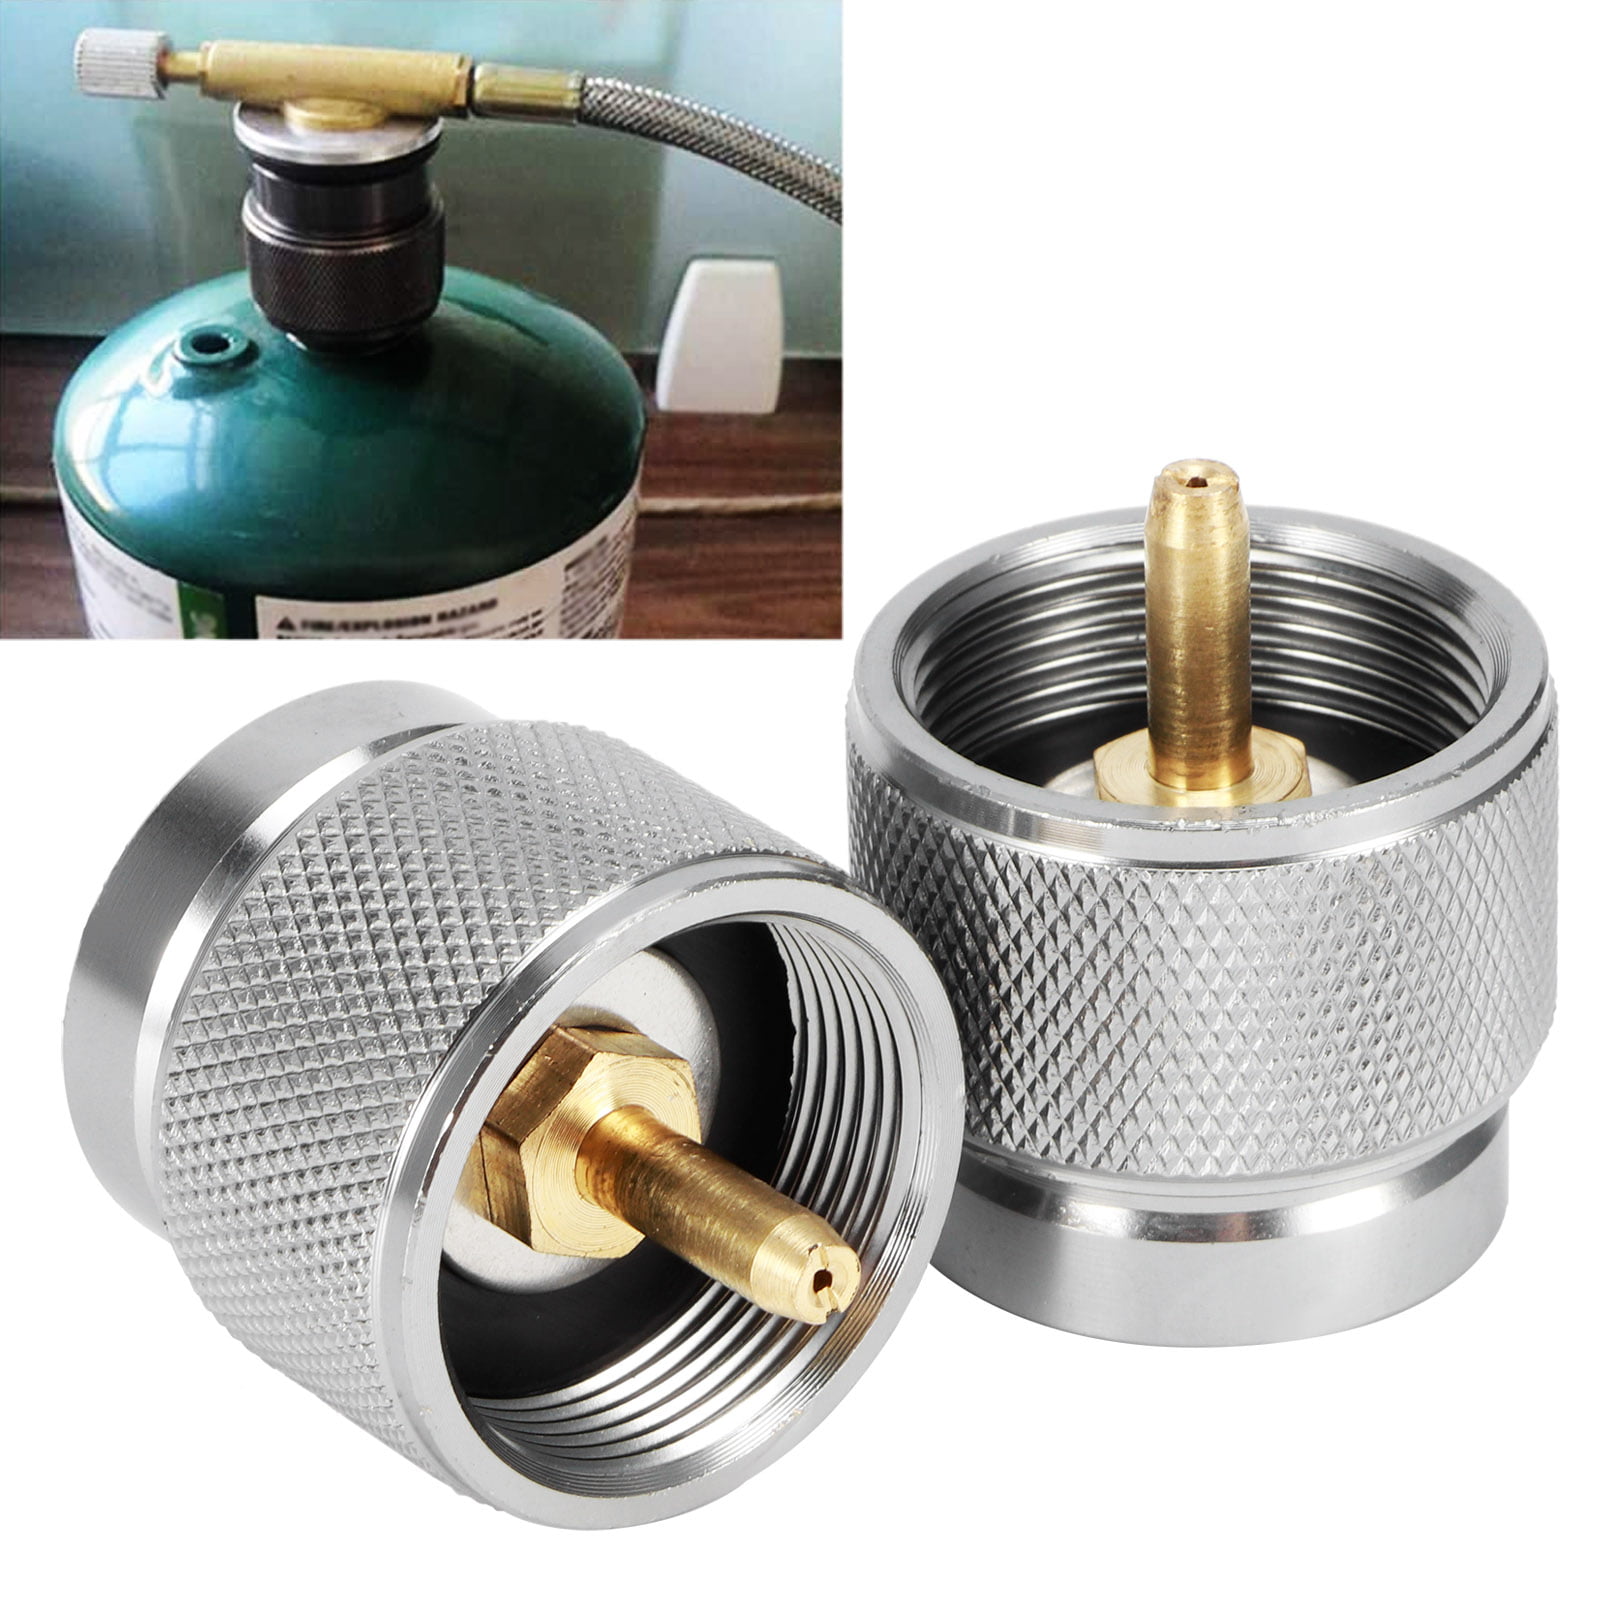 Outdoor Camping Stainless steel Stove Adapter Link Adaptor Nozzle Gas Bott*wy 